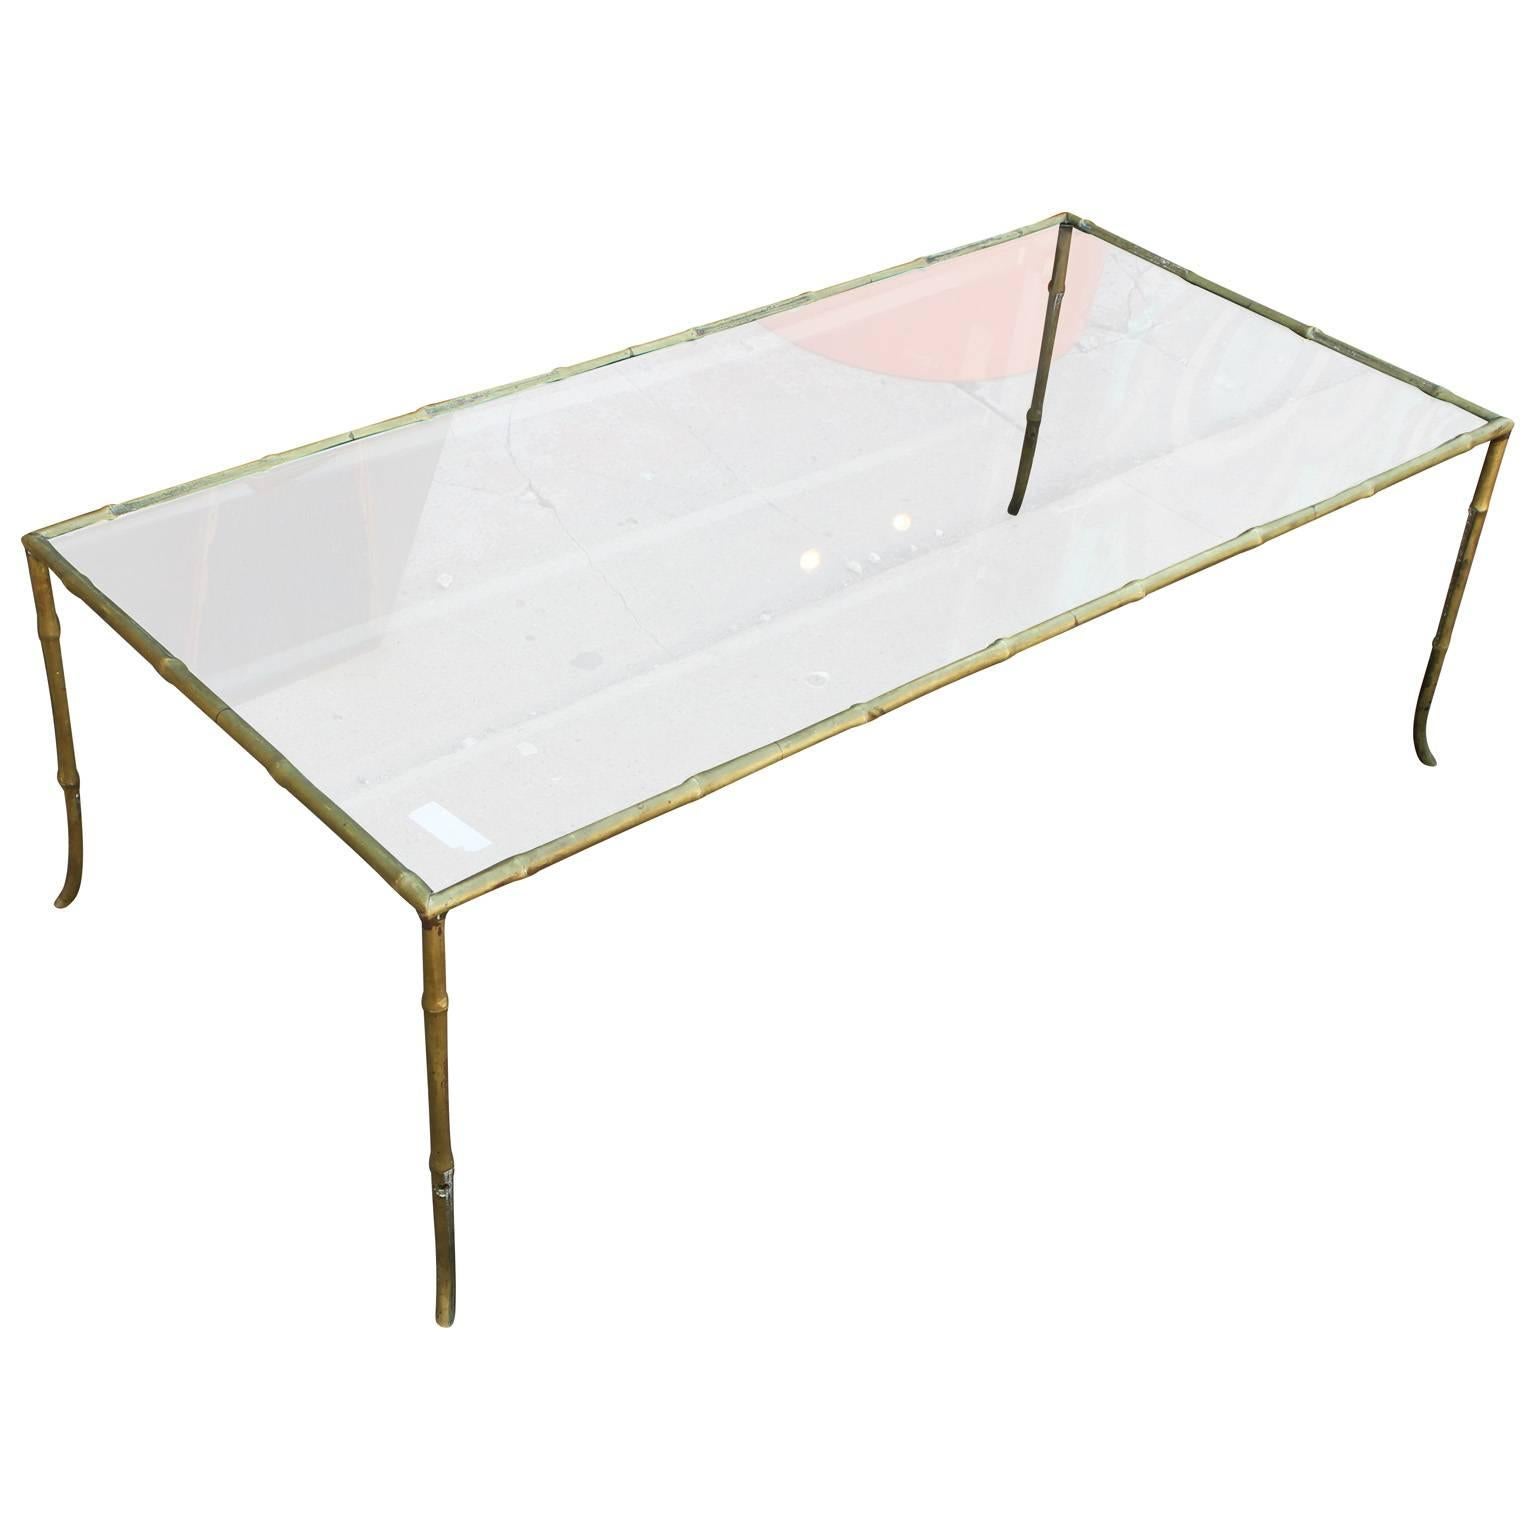 Elegant French brass and glass coffee table. Faux bamboo frame has simple delicate lines. Table is topped in glass. Perfect in a Mid-Century, tranistional, or Hollywood Regency interior. Possibly by Maison Bagues.